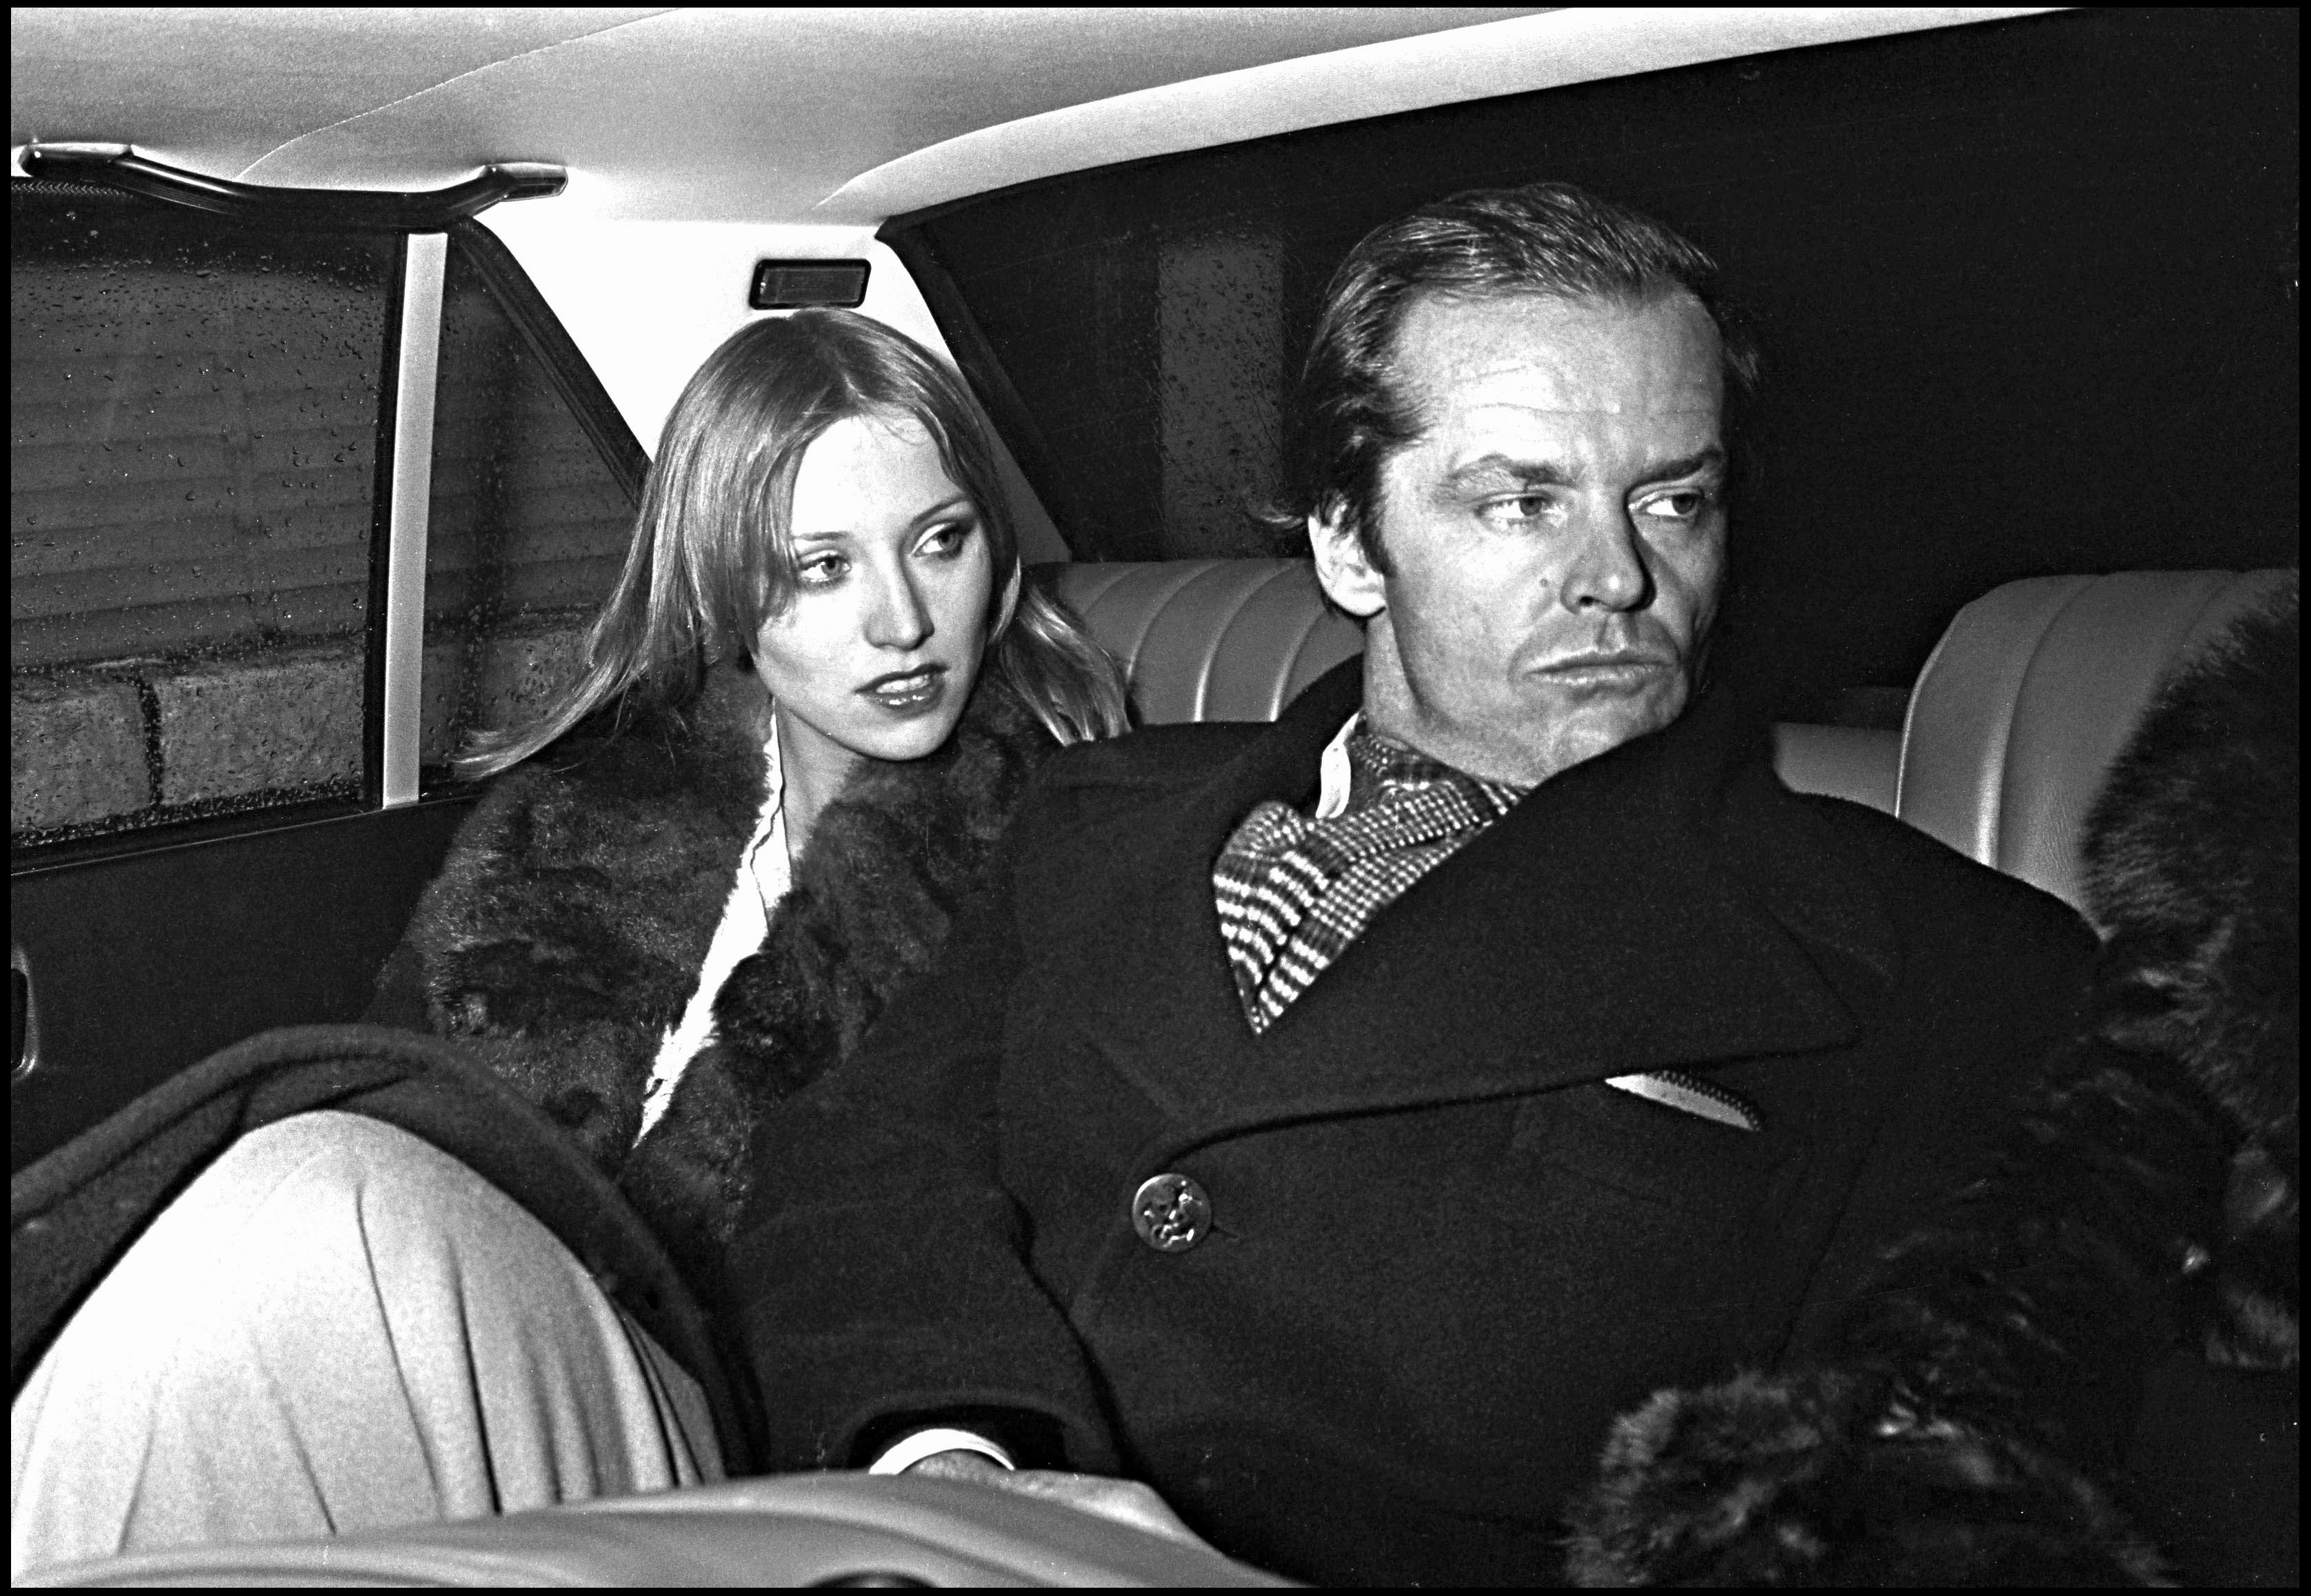 Jack Nicholson and Winnie Hollman on the way to see the movie "One Flew Over the Cuckoo's Nest" in 1976 in Paris, France. | Source: Getty Images